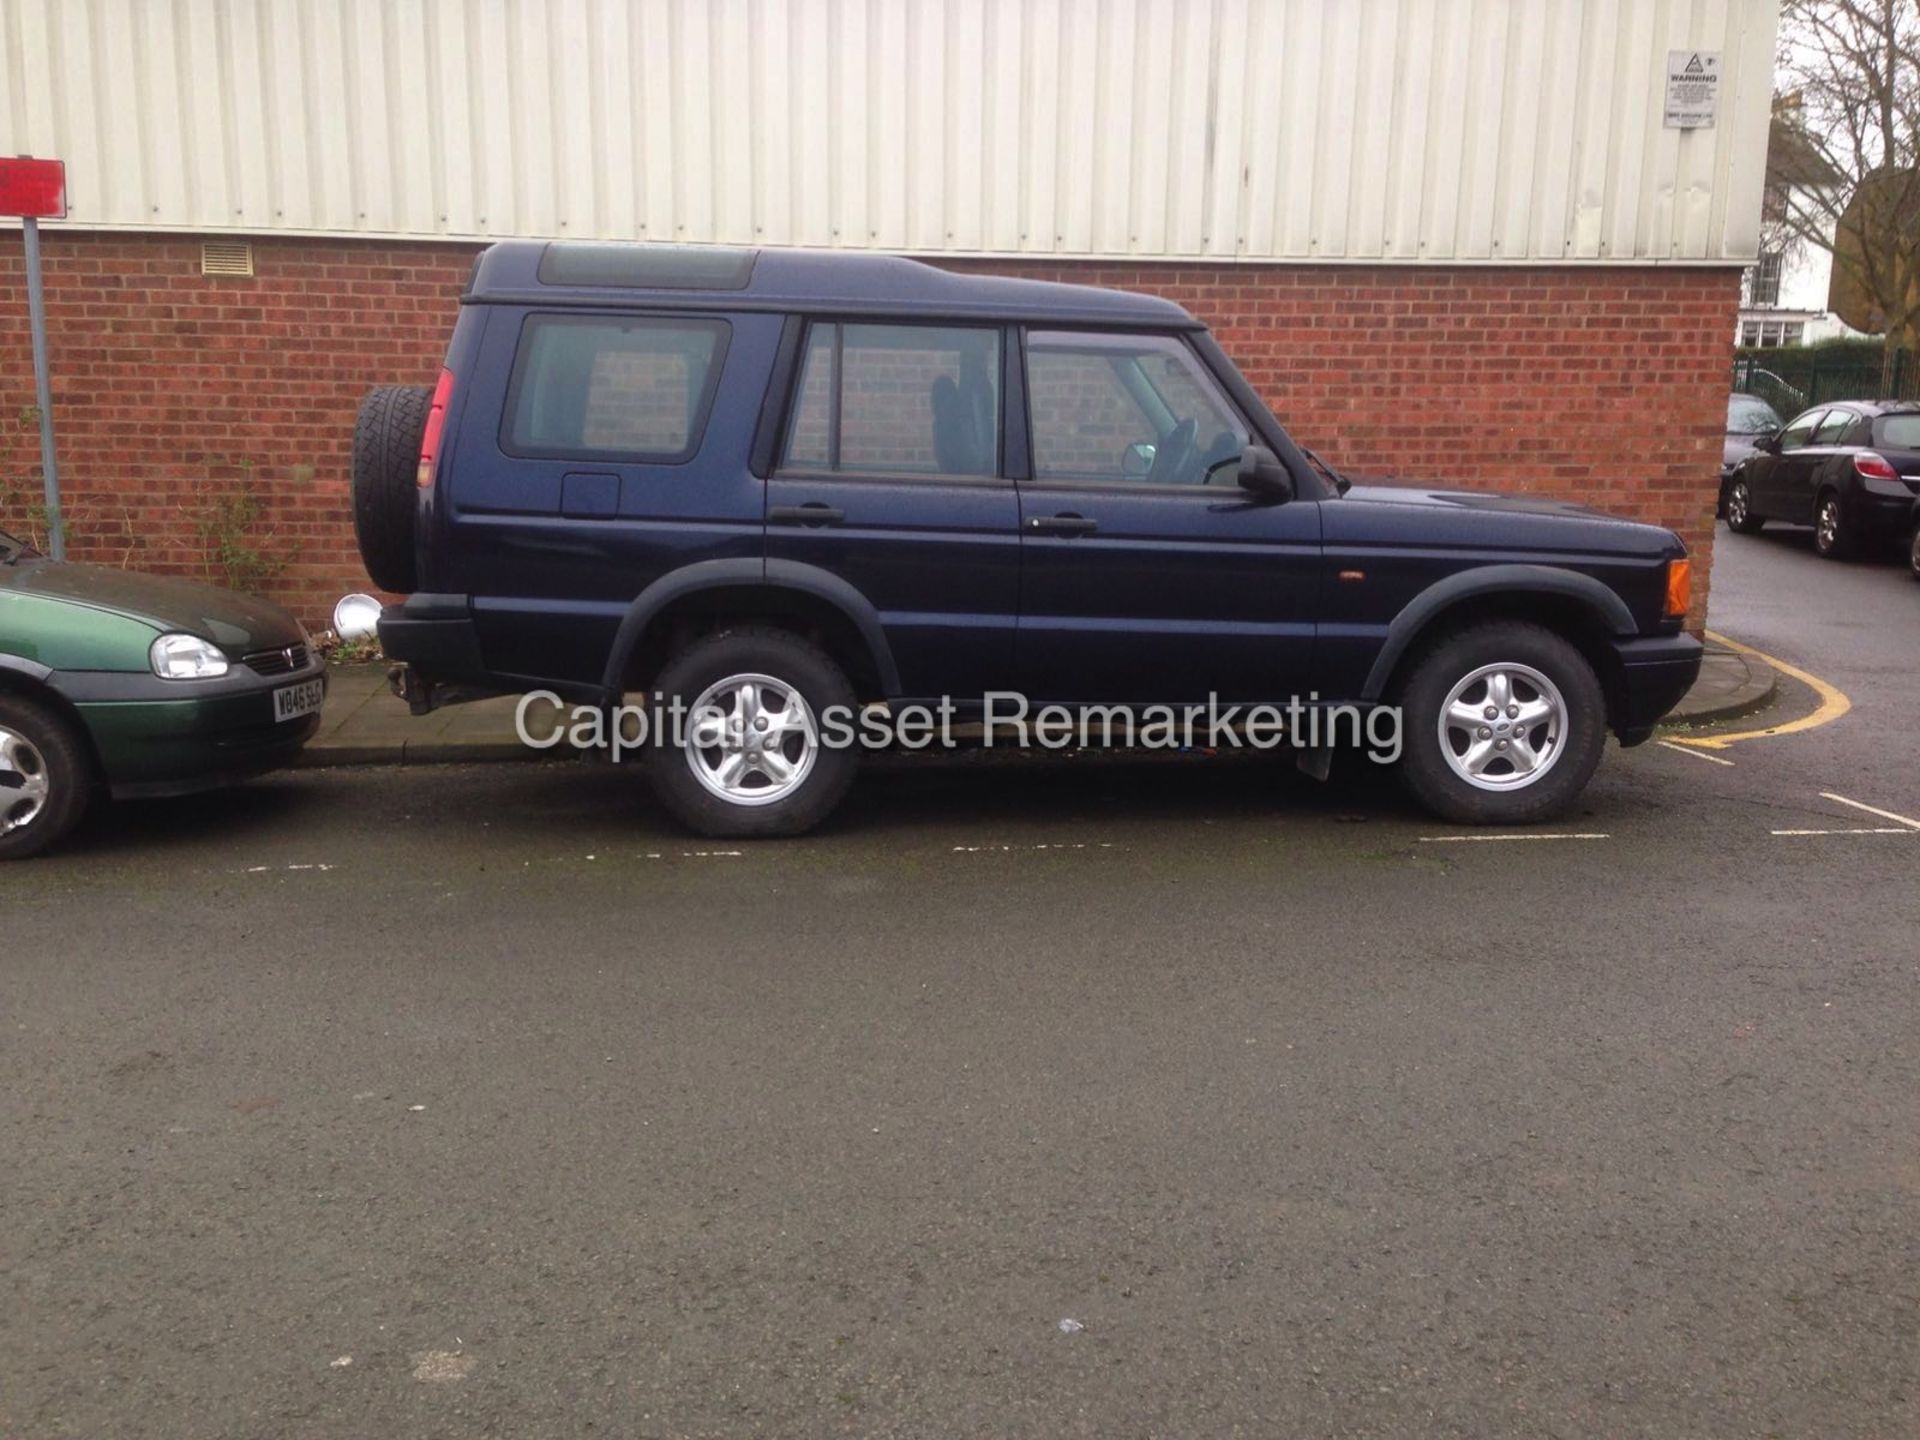 (On Sale) LANDROVER DISCOVERY "TD5" GS - 02 REG - LOW MILES - 7 SEATER - LOOK! - NO VAT TO PAY - Image 3 of 6